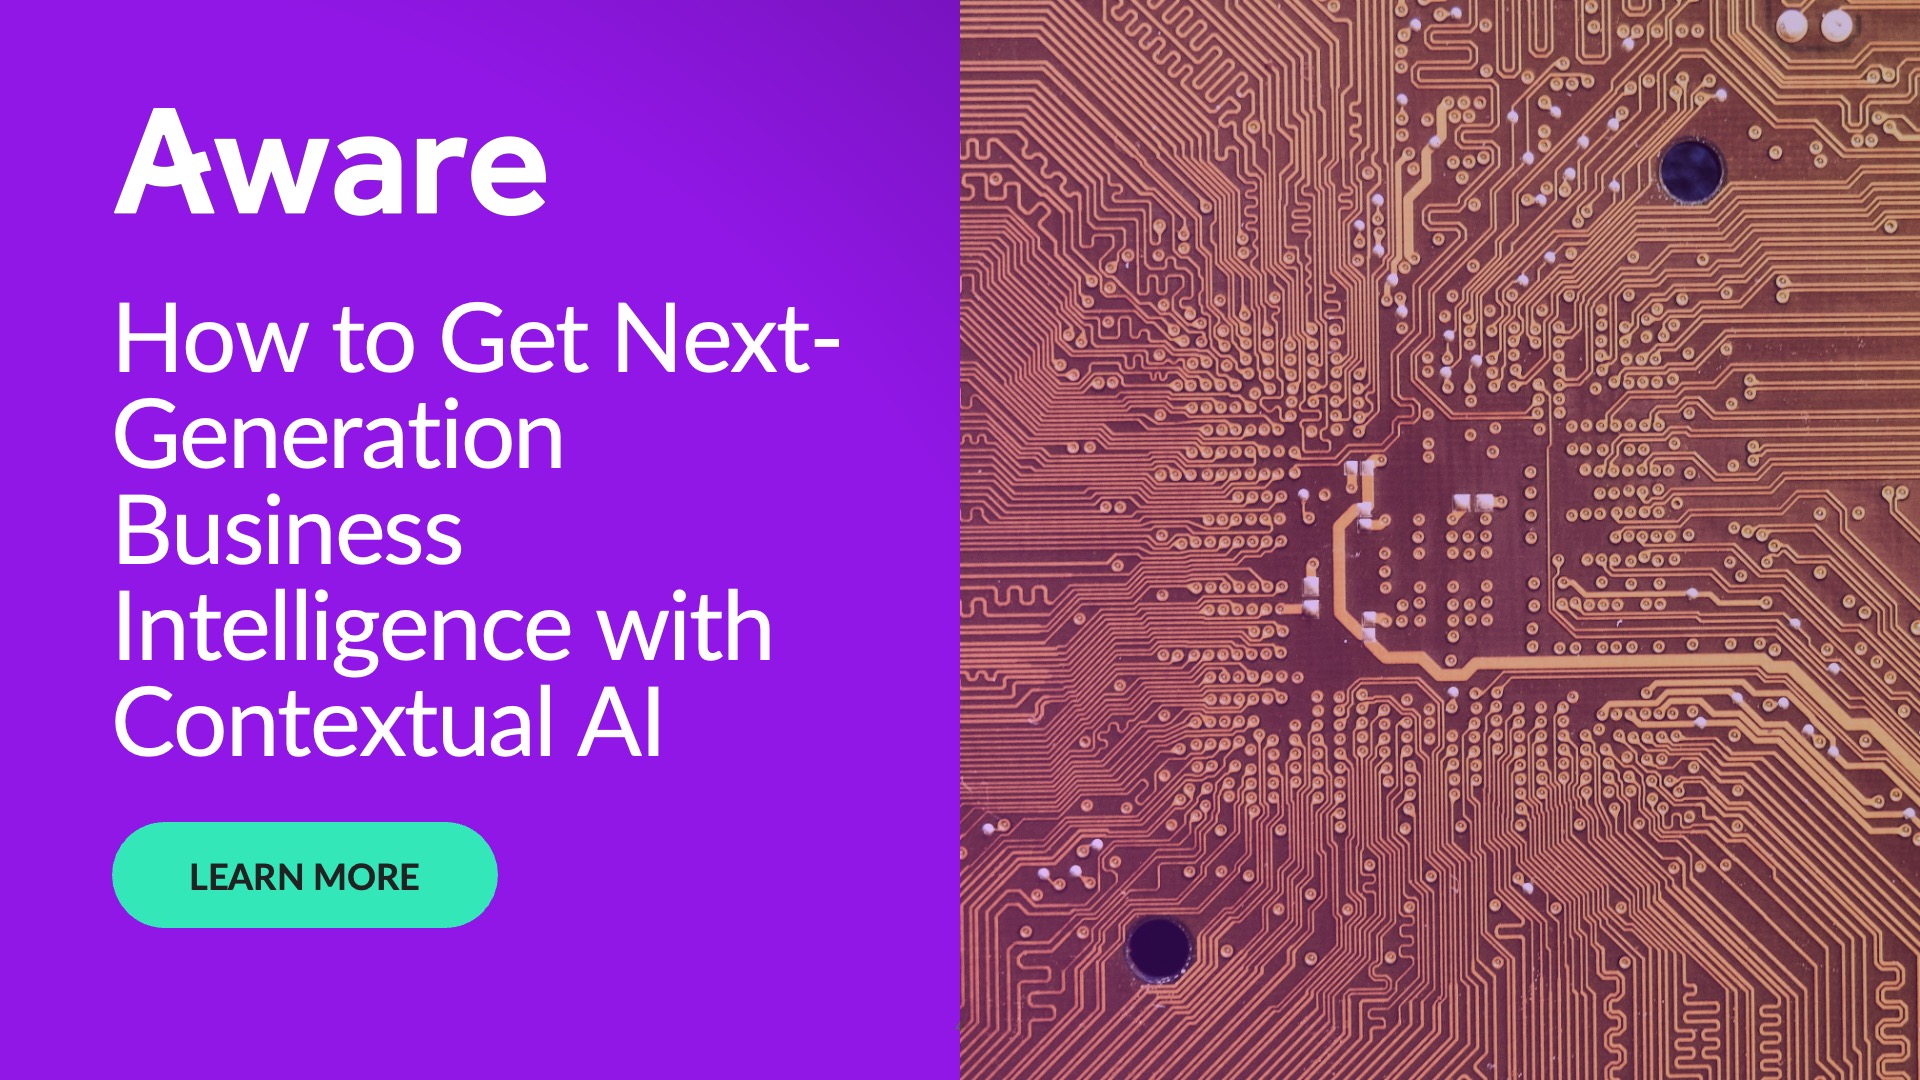 How to Get Next-Generation Business Intelligence with Contextual AI